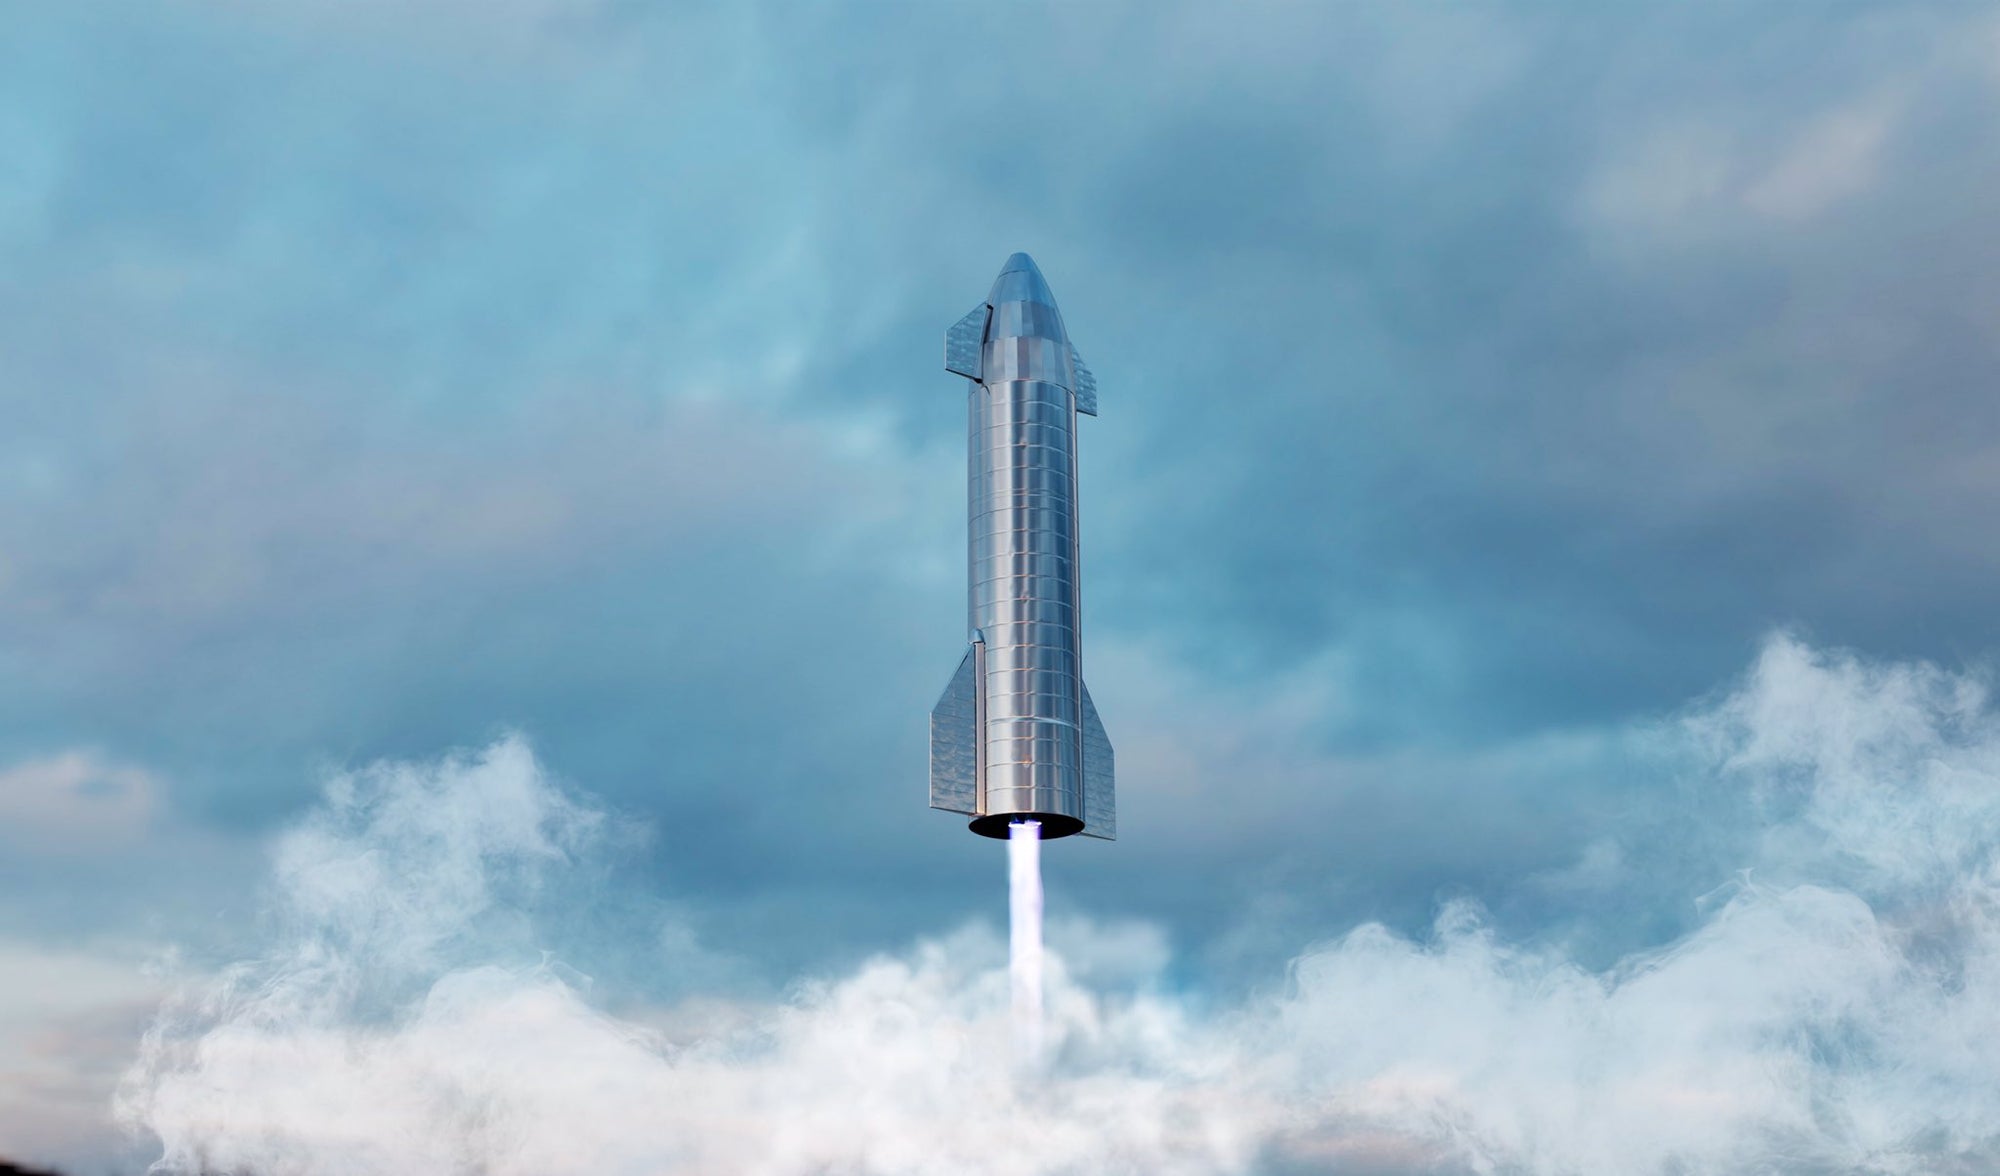 Download Spacex Starship Sn8 Test Flight Date Gif